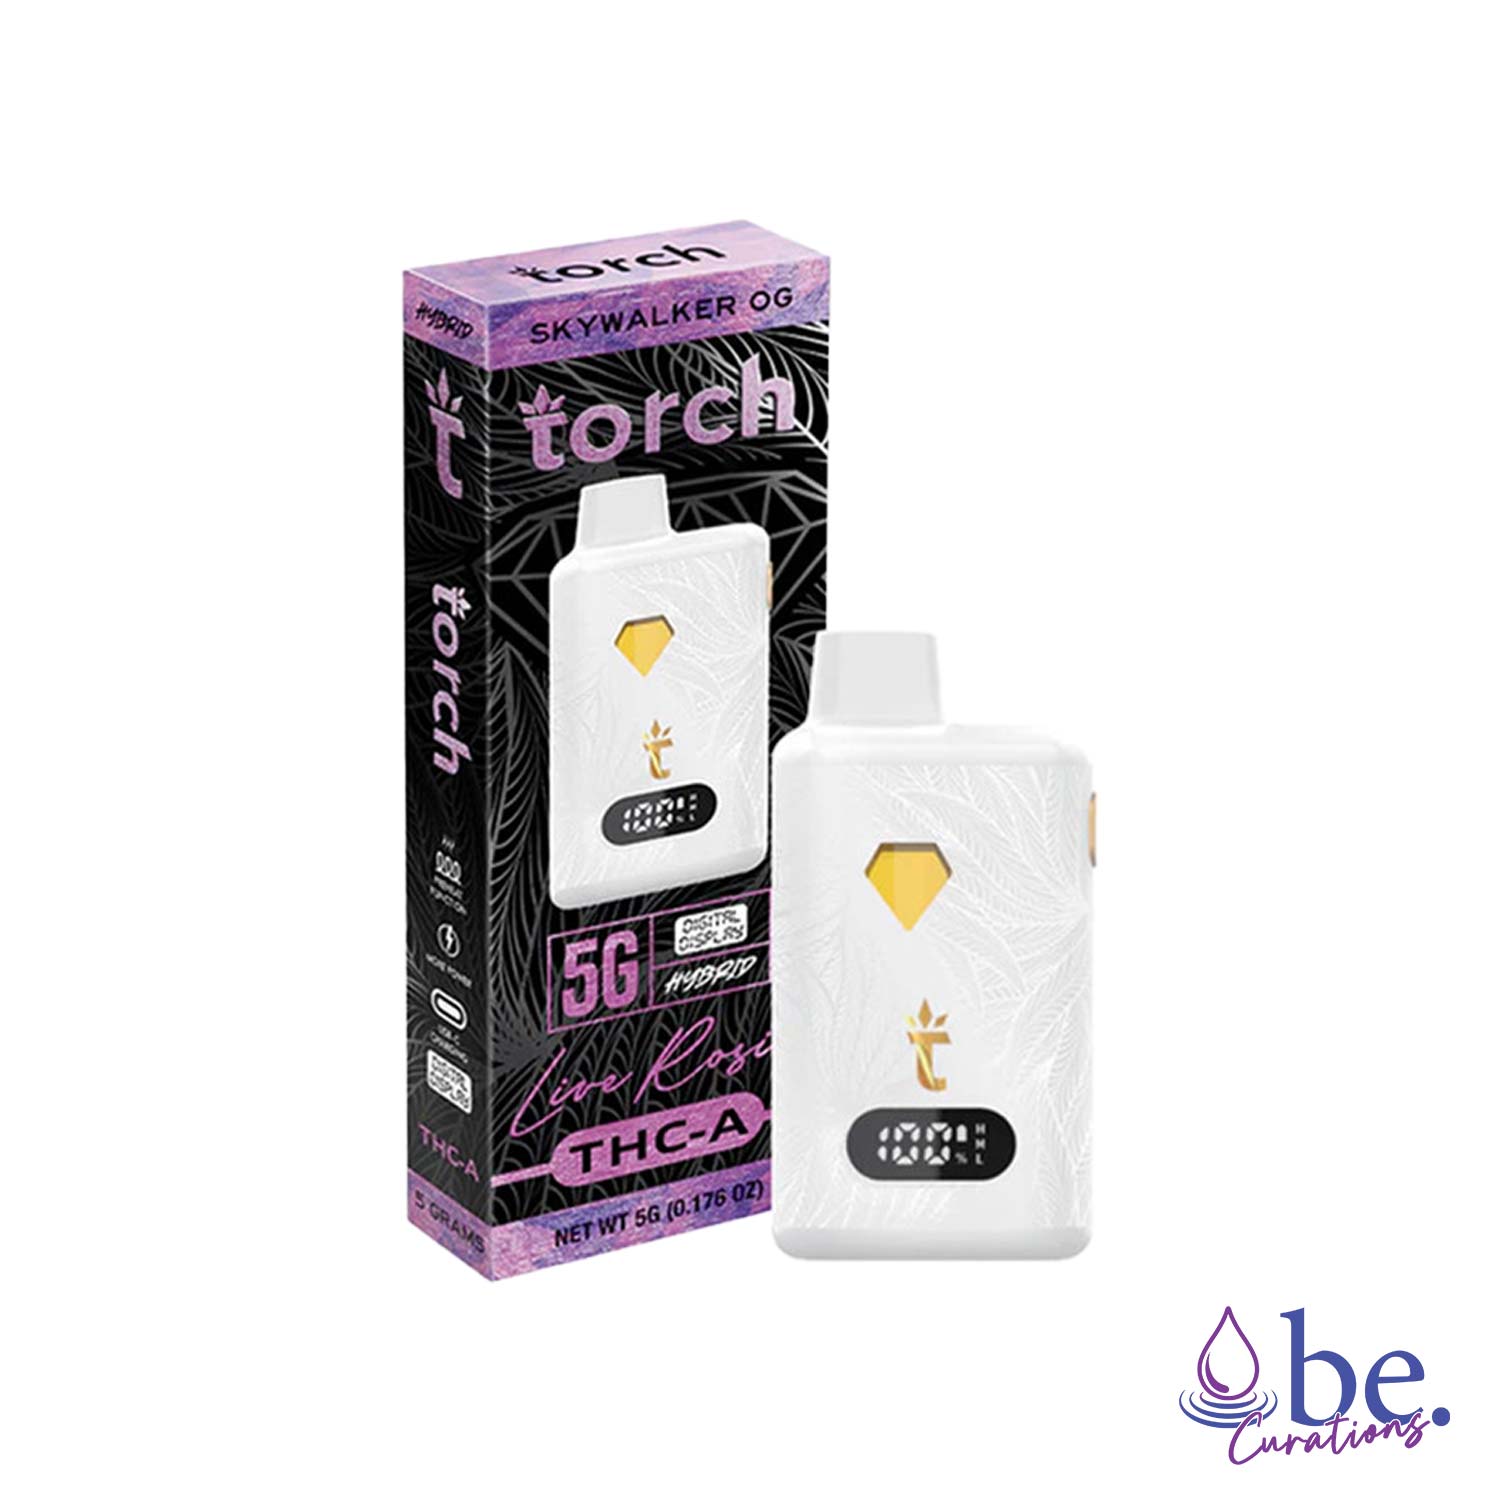 Torch Delta THC-A + Live Rosin Disposable Vape Device 5G - Skywalker OG (Hybrid) | Pine flavor with spicy, herbal undertones and a hint of gas. | be.Curations